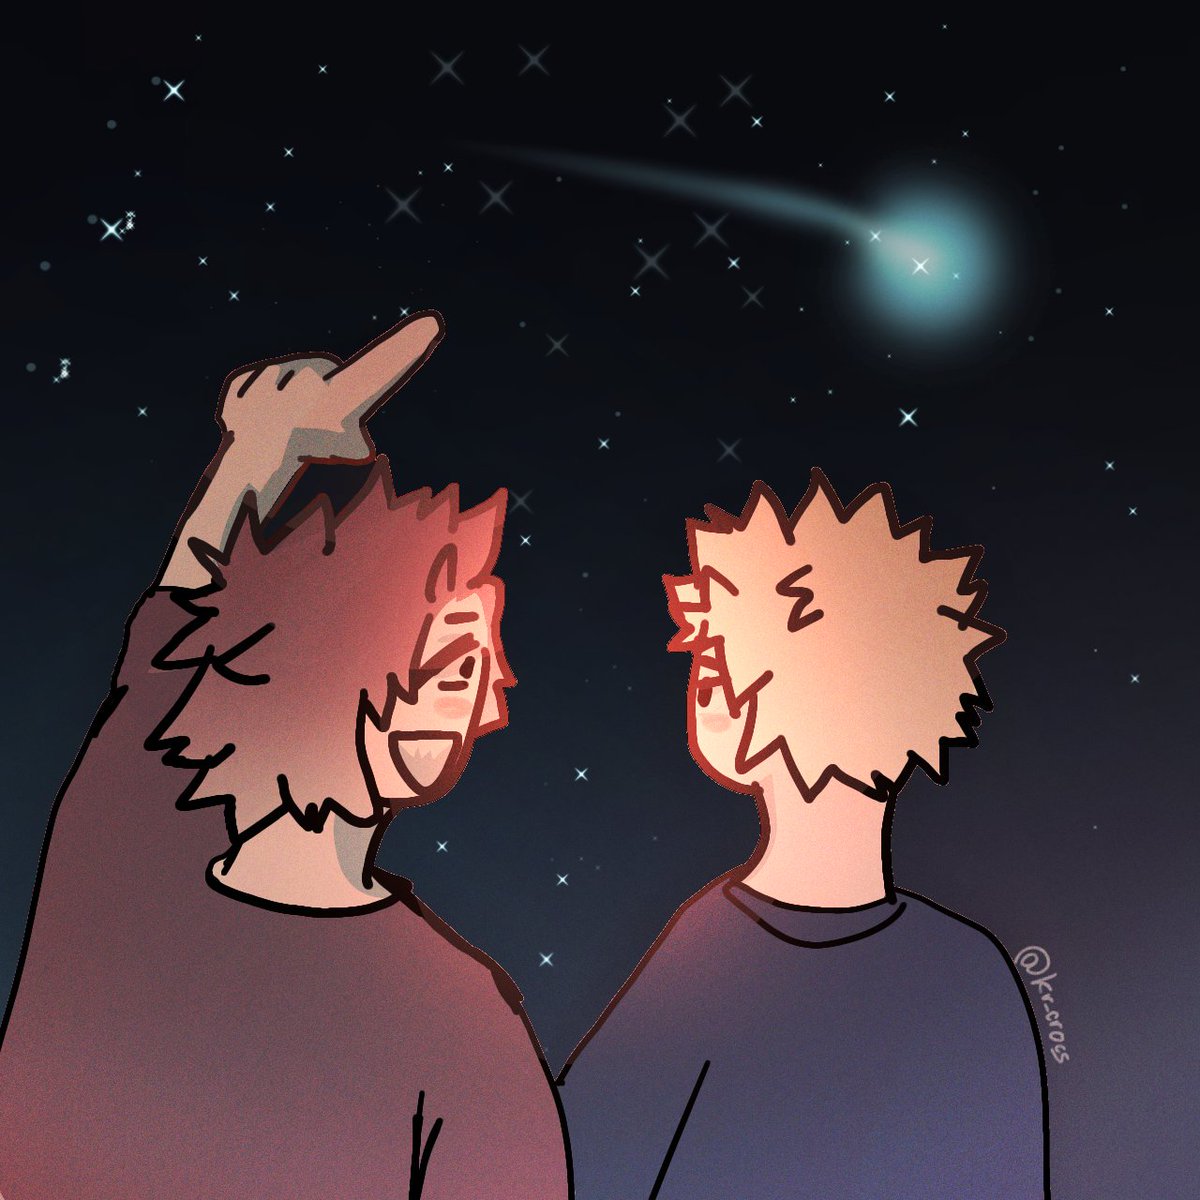 Day 5/6 .🌠🌌

They keep talking about the things they like and sometimes they don't realize that it's too late, but although they both talk about different topics, their wish for both of them was already fulfilled when they met.
#KRBKWeek24